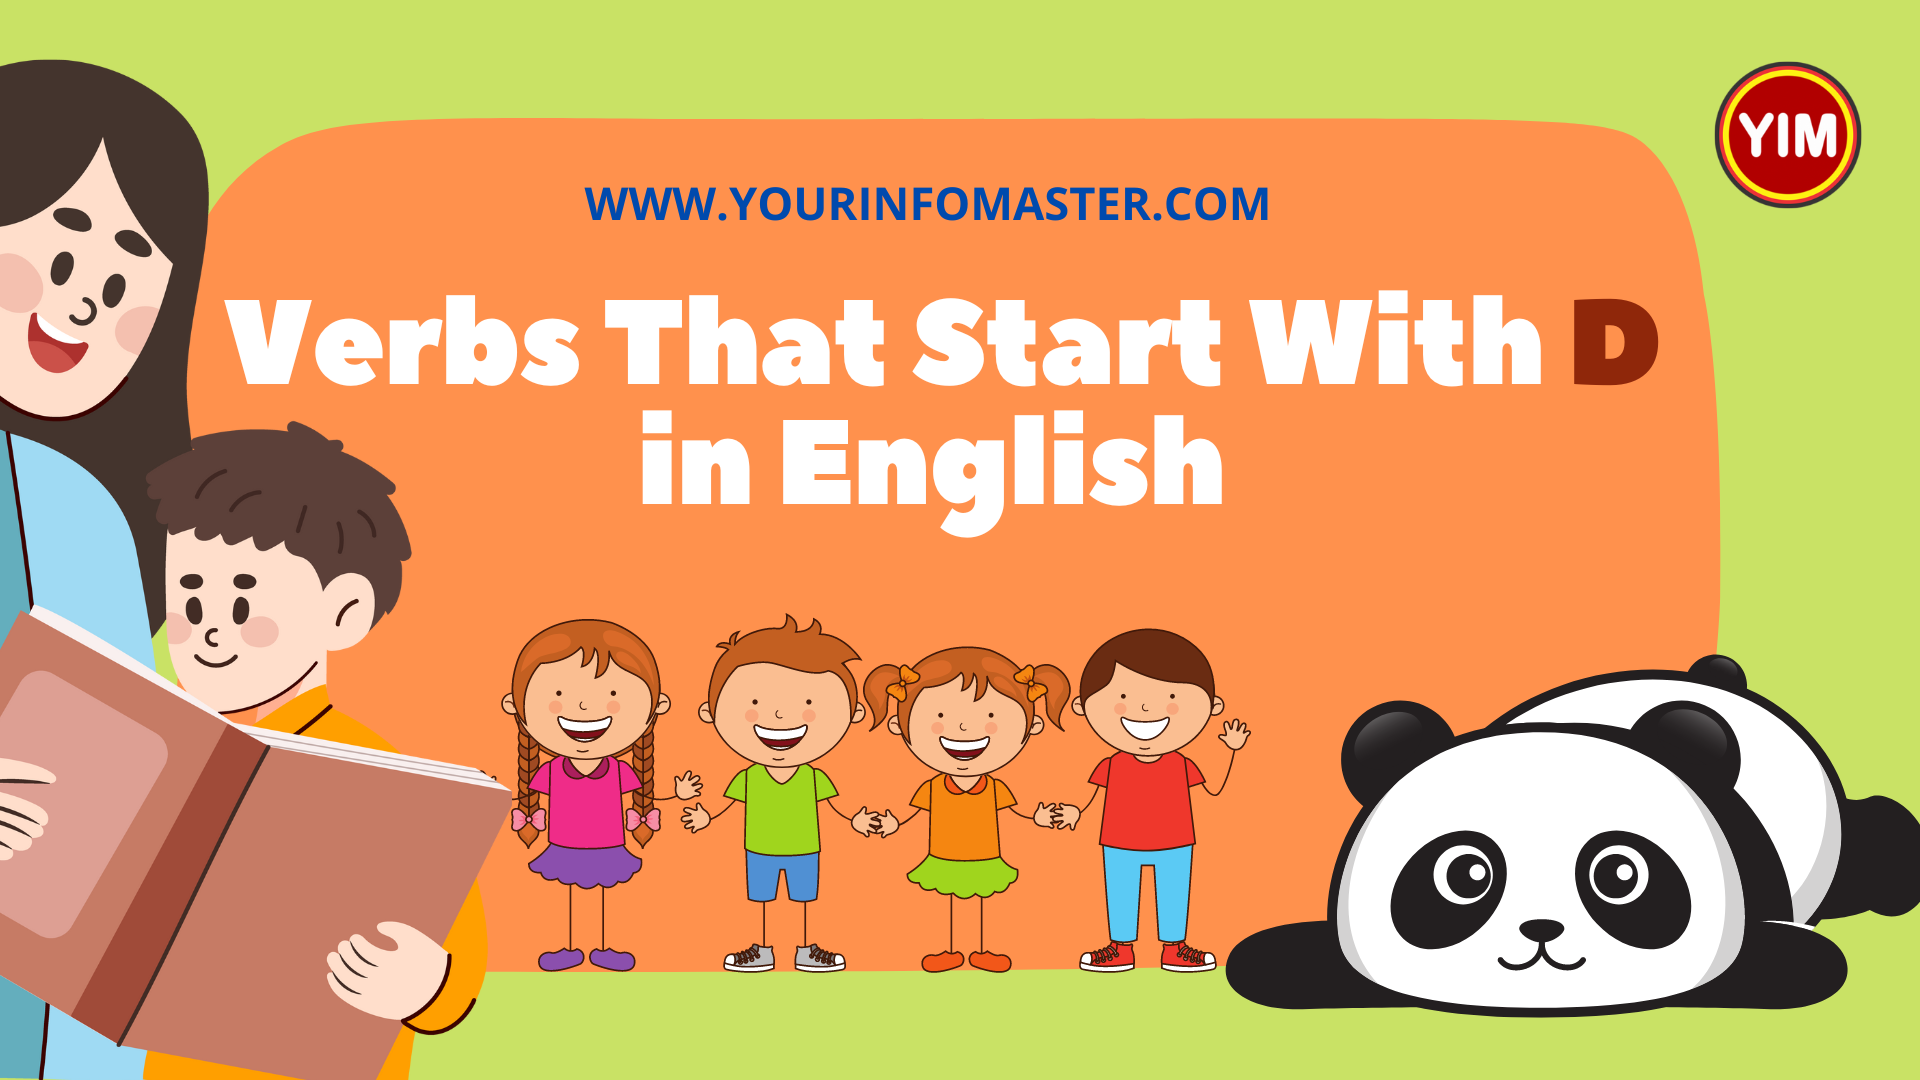 5 Letter Verbs, 5 Letter Verbs Starting With D, Action Words, Action Words That Start With D, D Action Words, D Verbs, D Verbs in English, English, English Grammar, English Vocabulary, English Words, List of Verbs That Start With D, Verbs List, Verbs That Start With D, Vocabulary, Words That Start with d